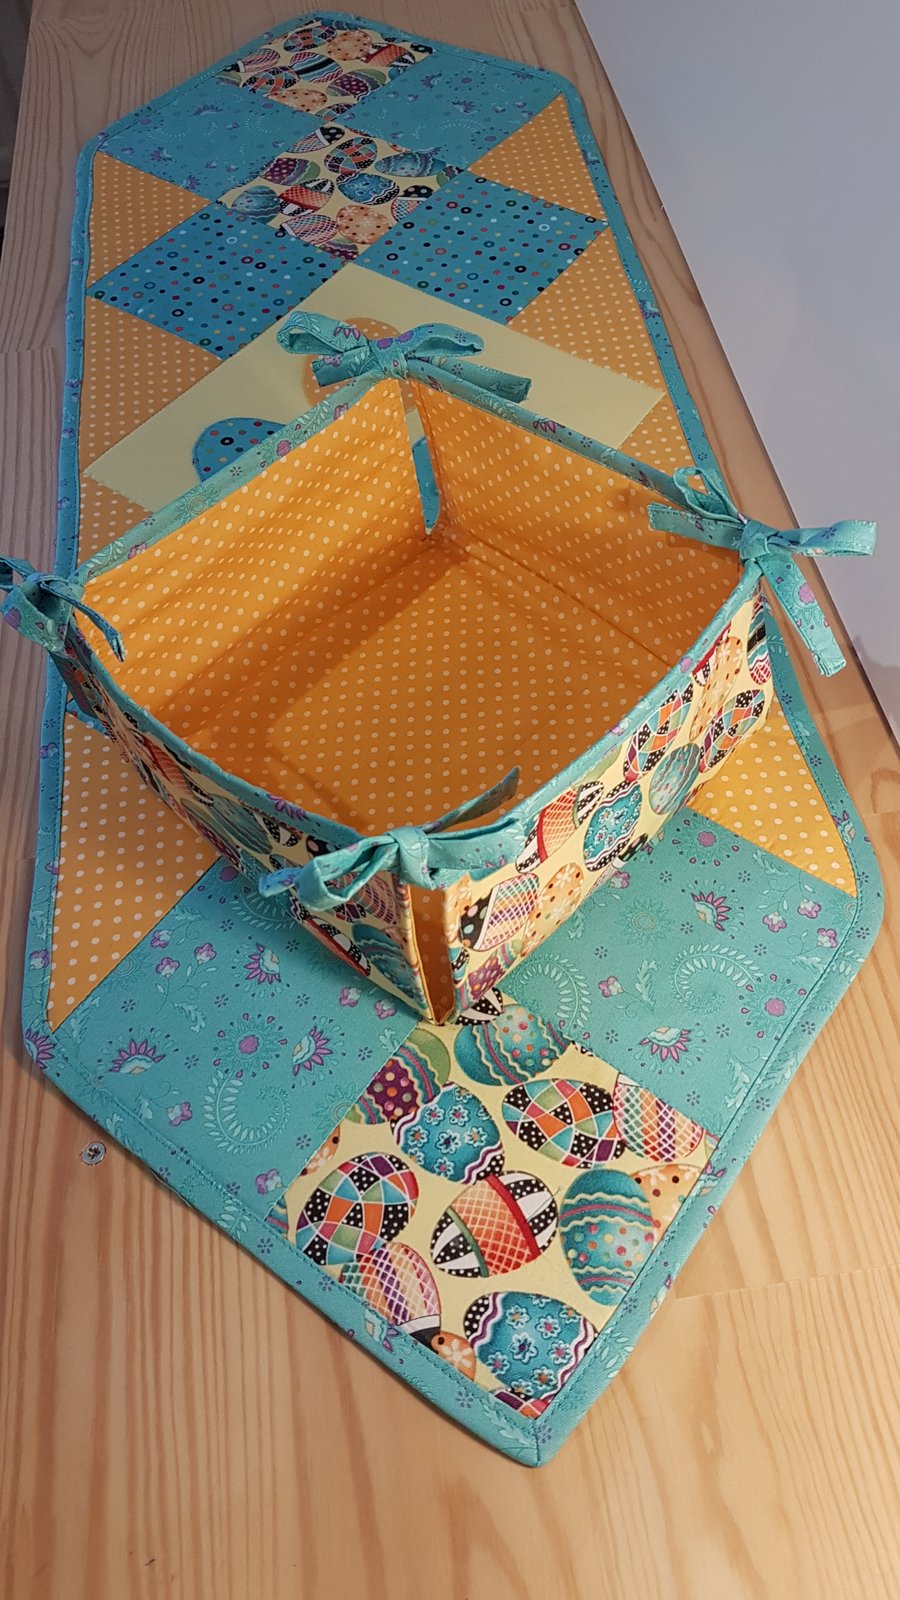 Easter table runner with basket